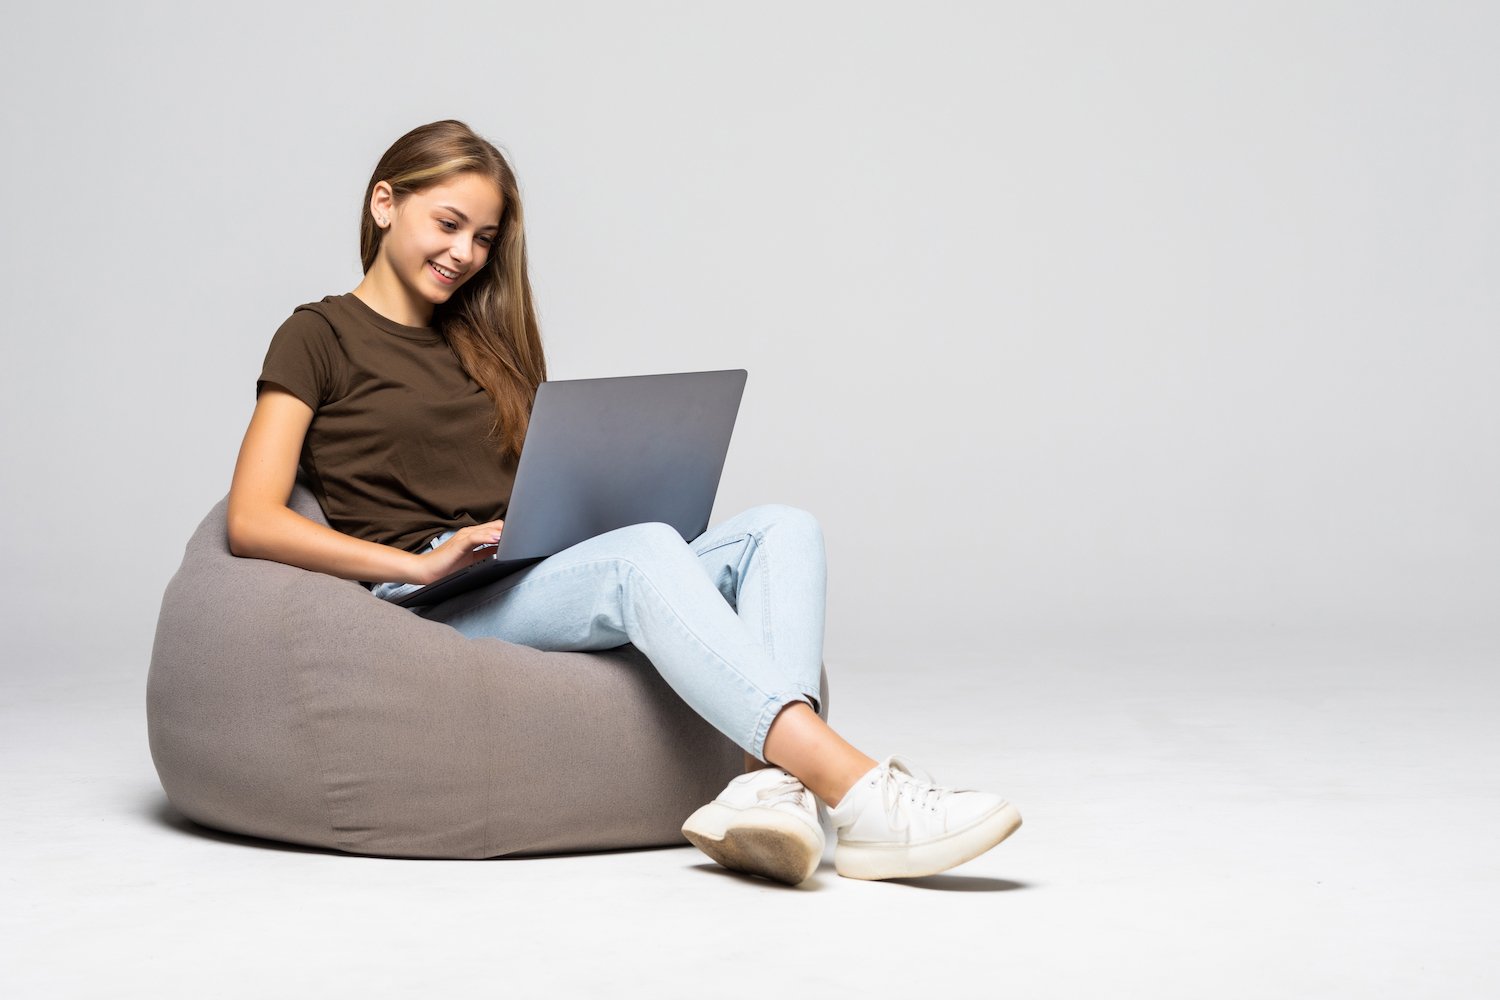 happy-young-woman-sitting-floor-using-laptop-gray-wall